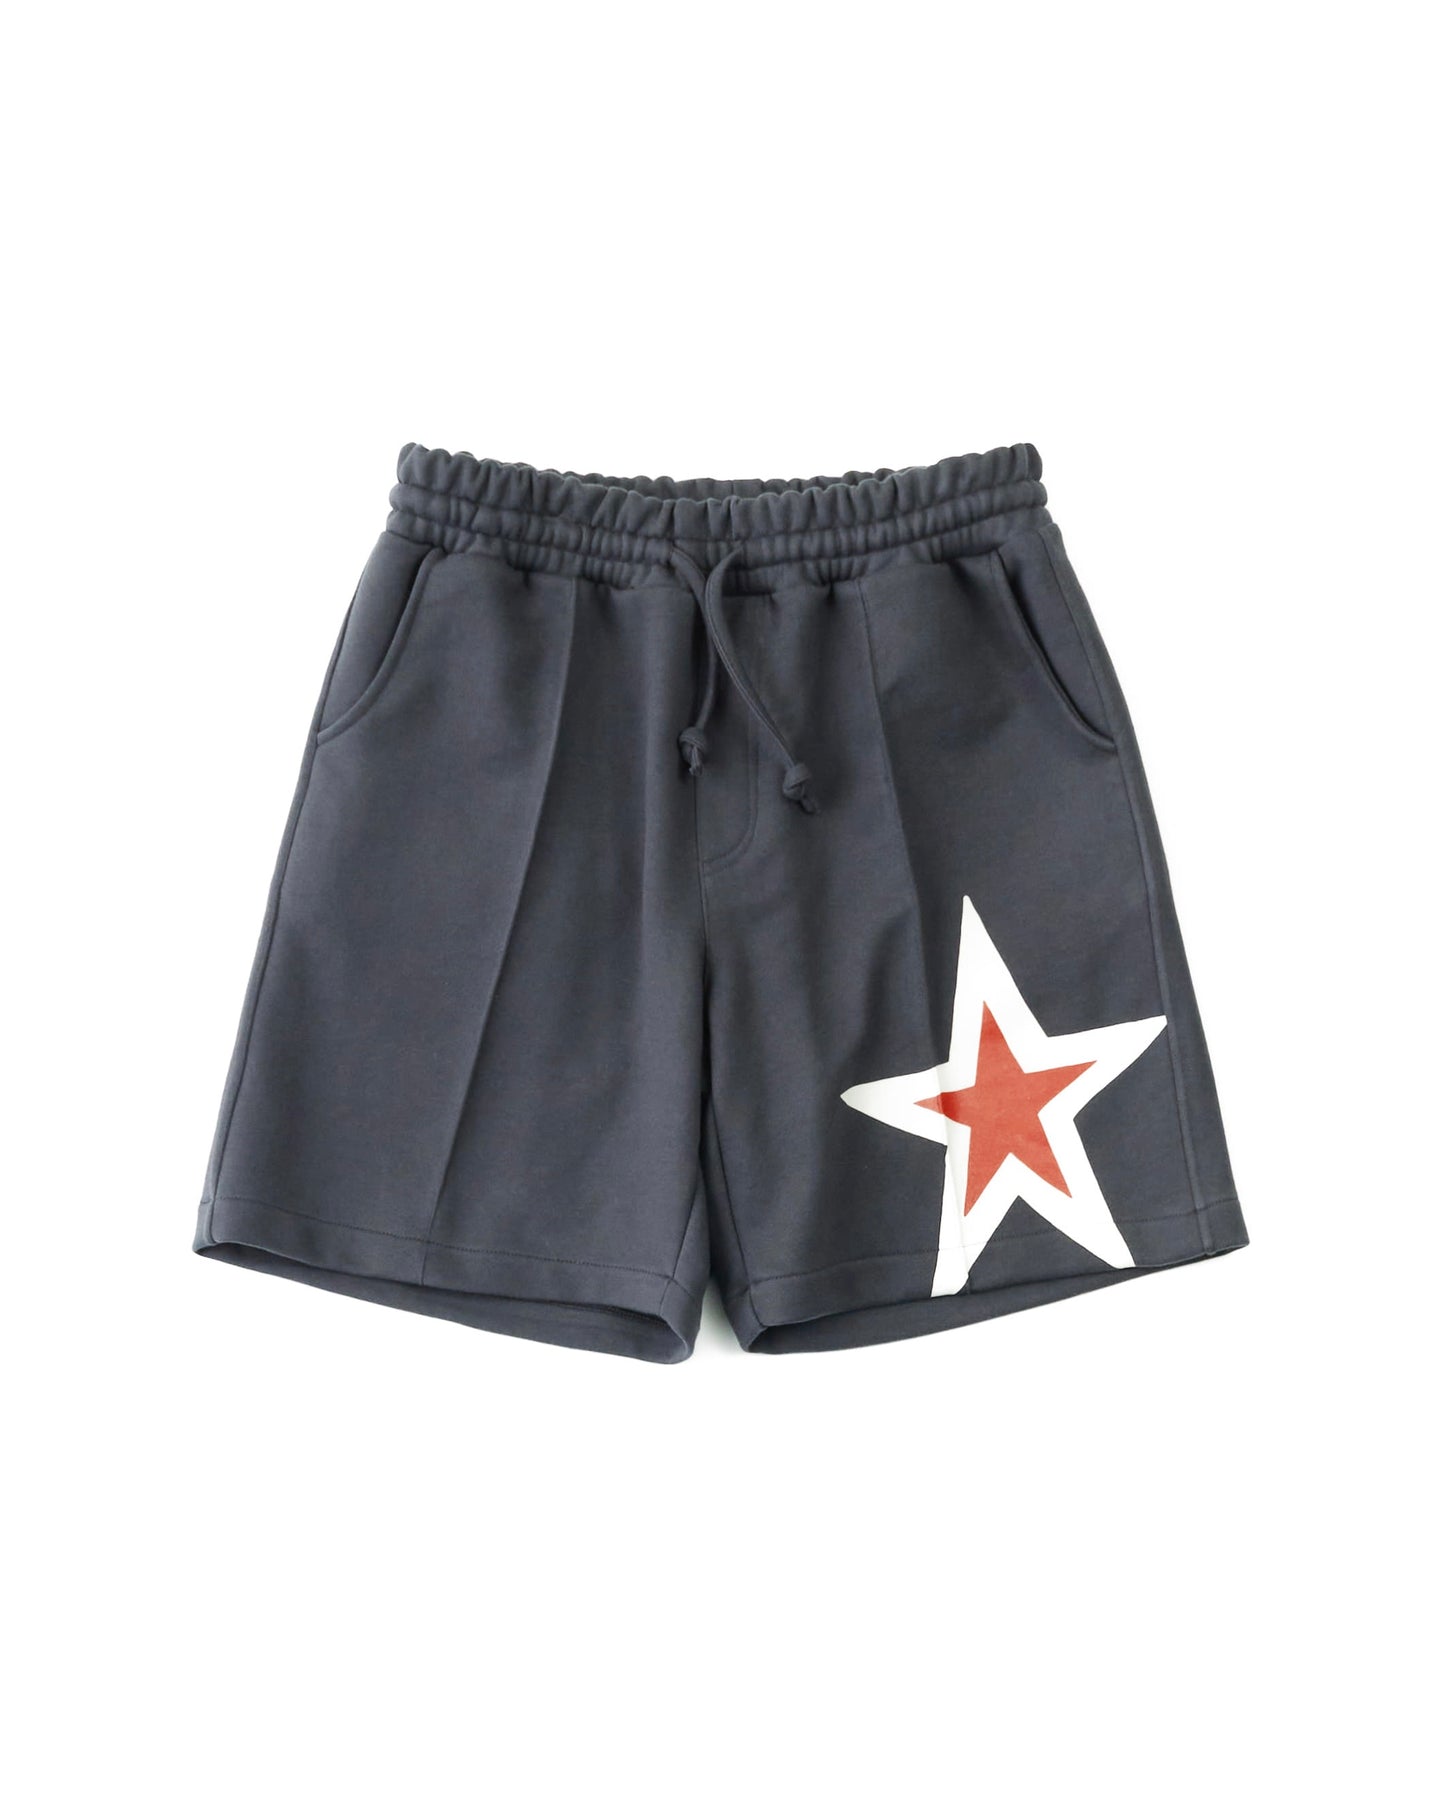 Tee Library Men's Star Shorts in Charcoal